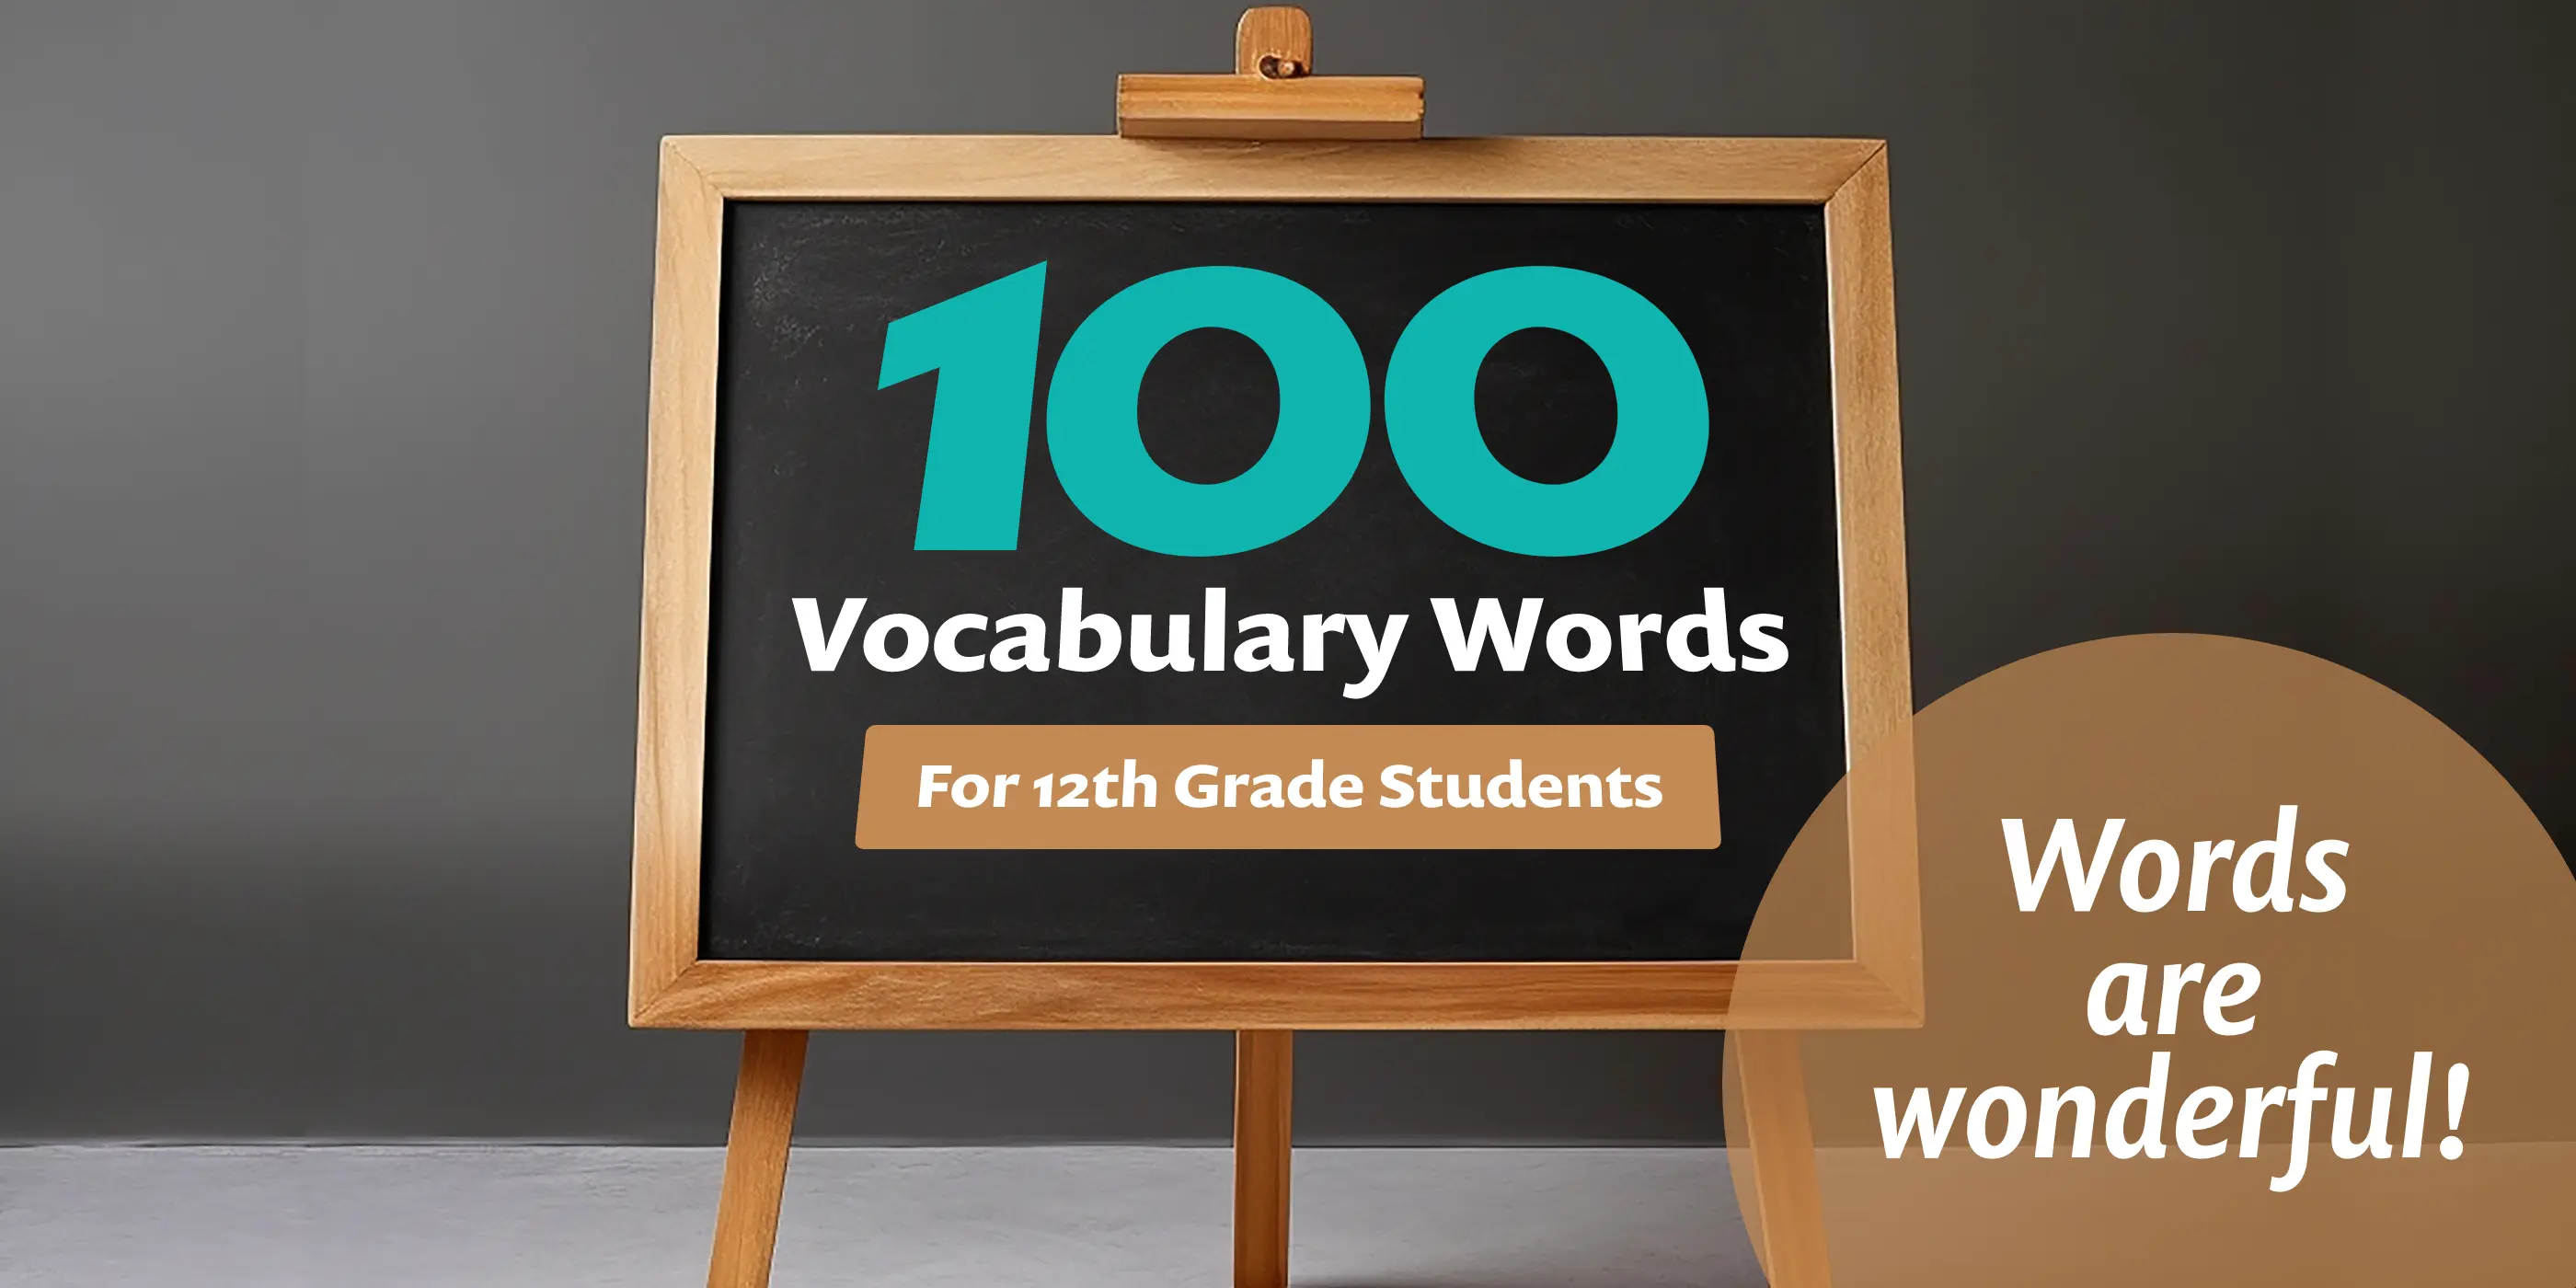 100 Vocabulary Words for 12th Grade Students